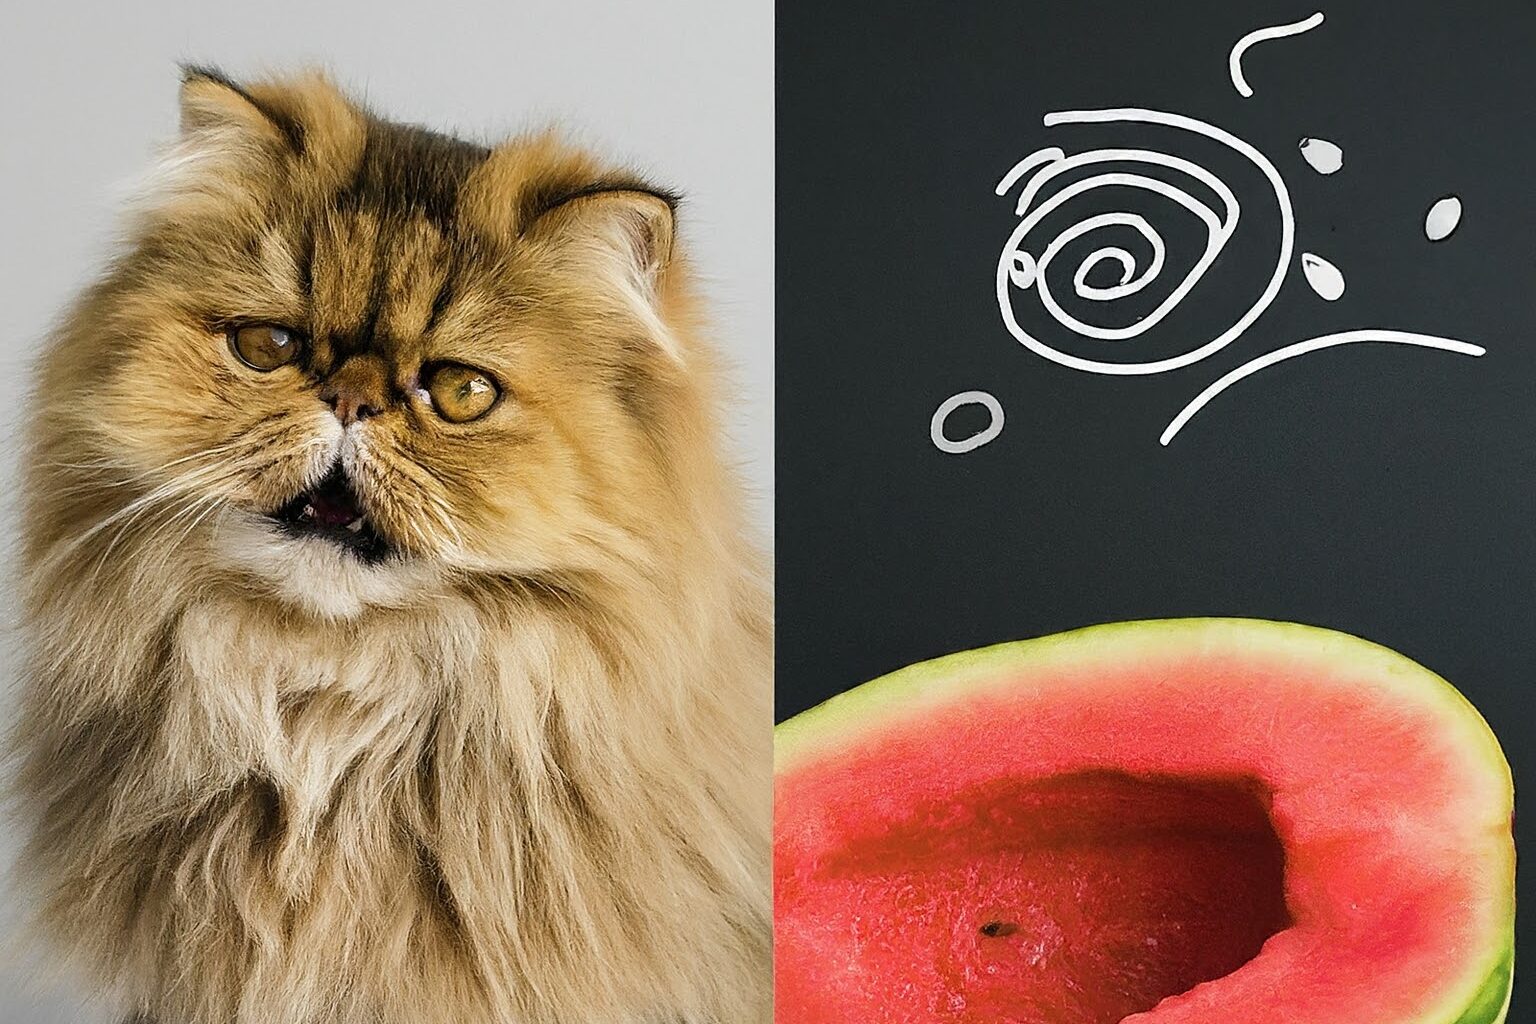 A curious cat sniffs a slice of watermelon, wondering if it's safe to eat.